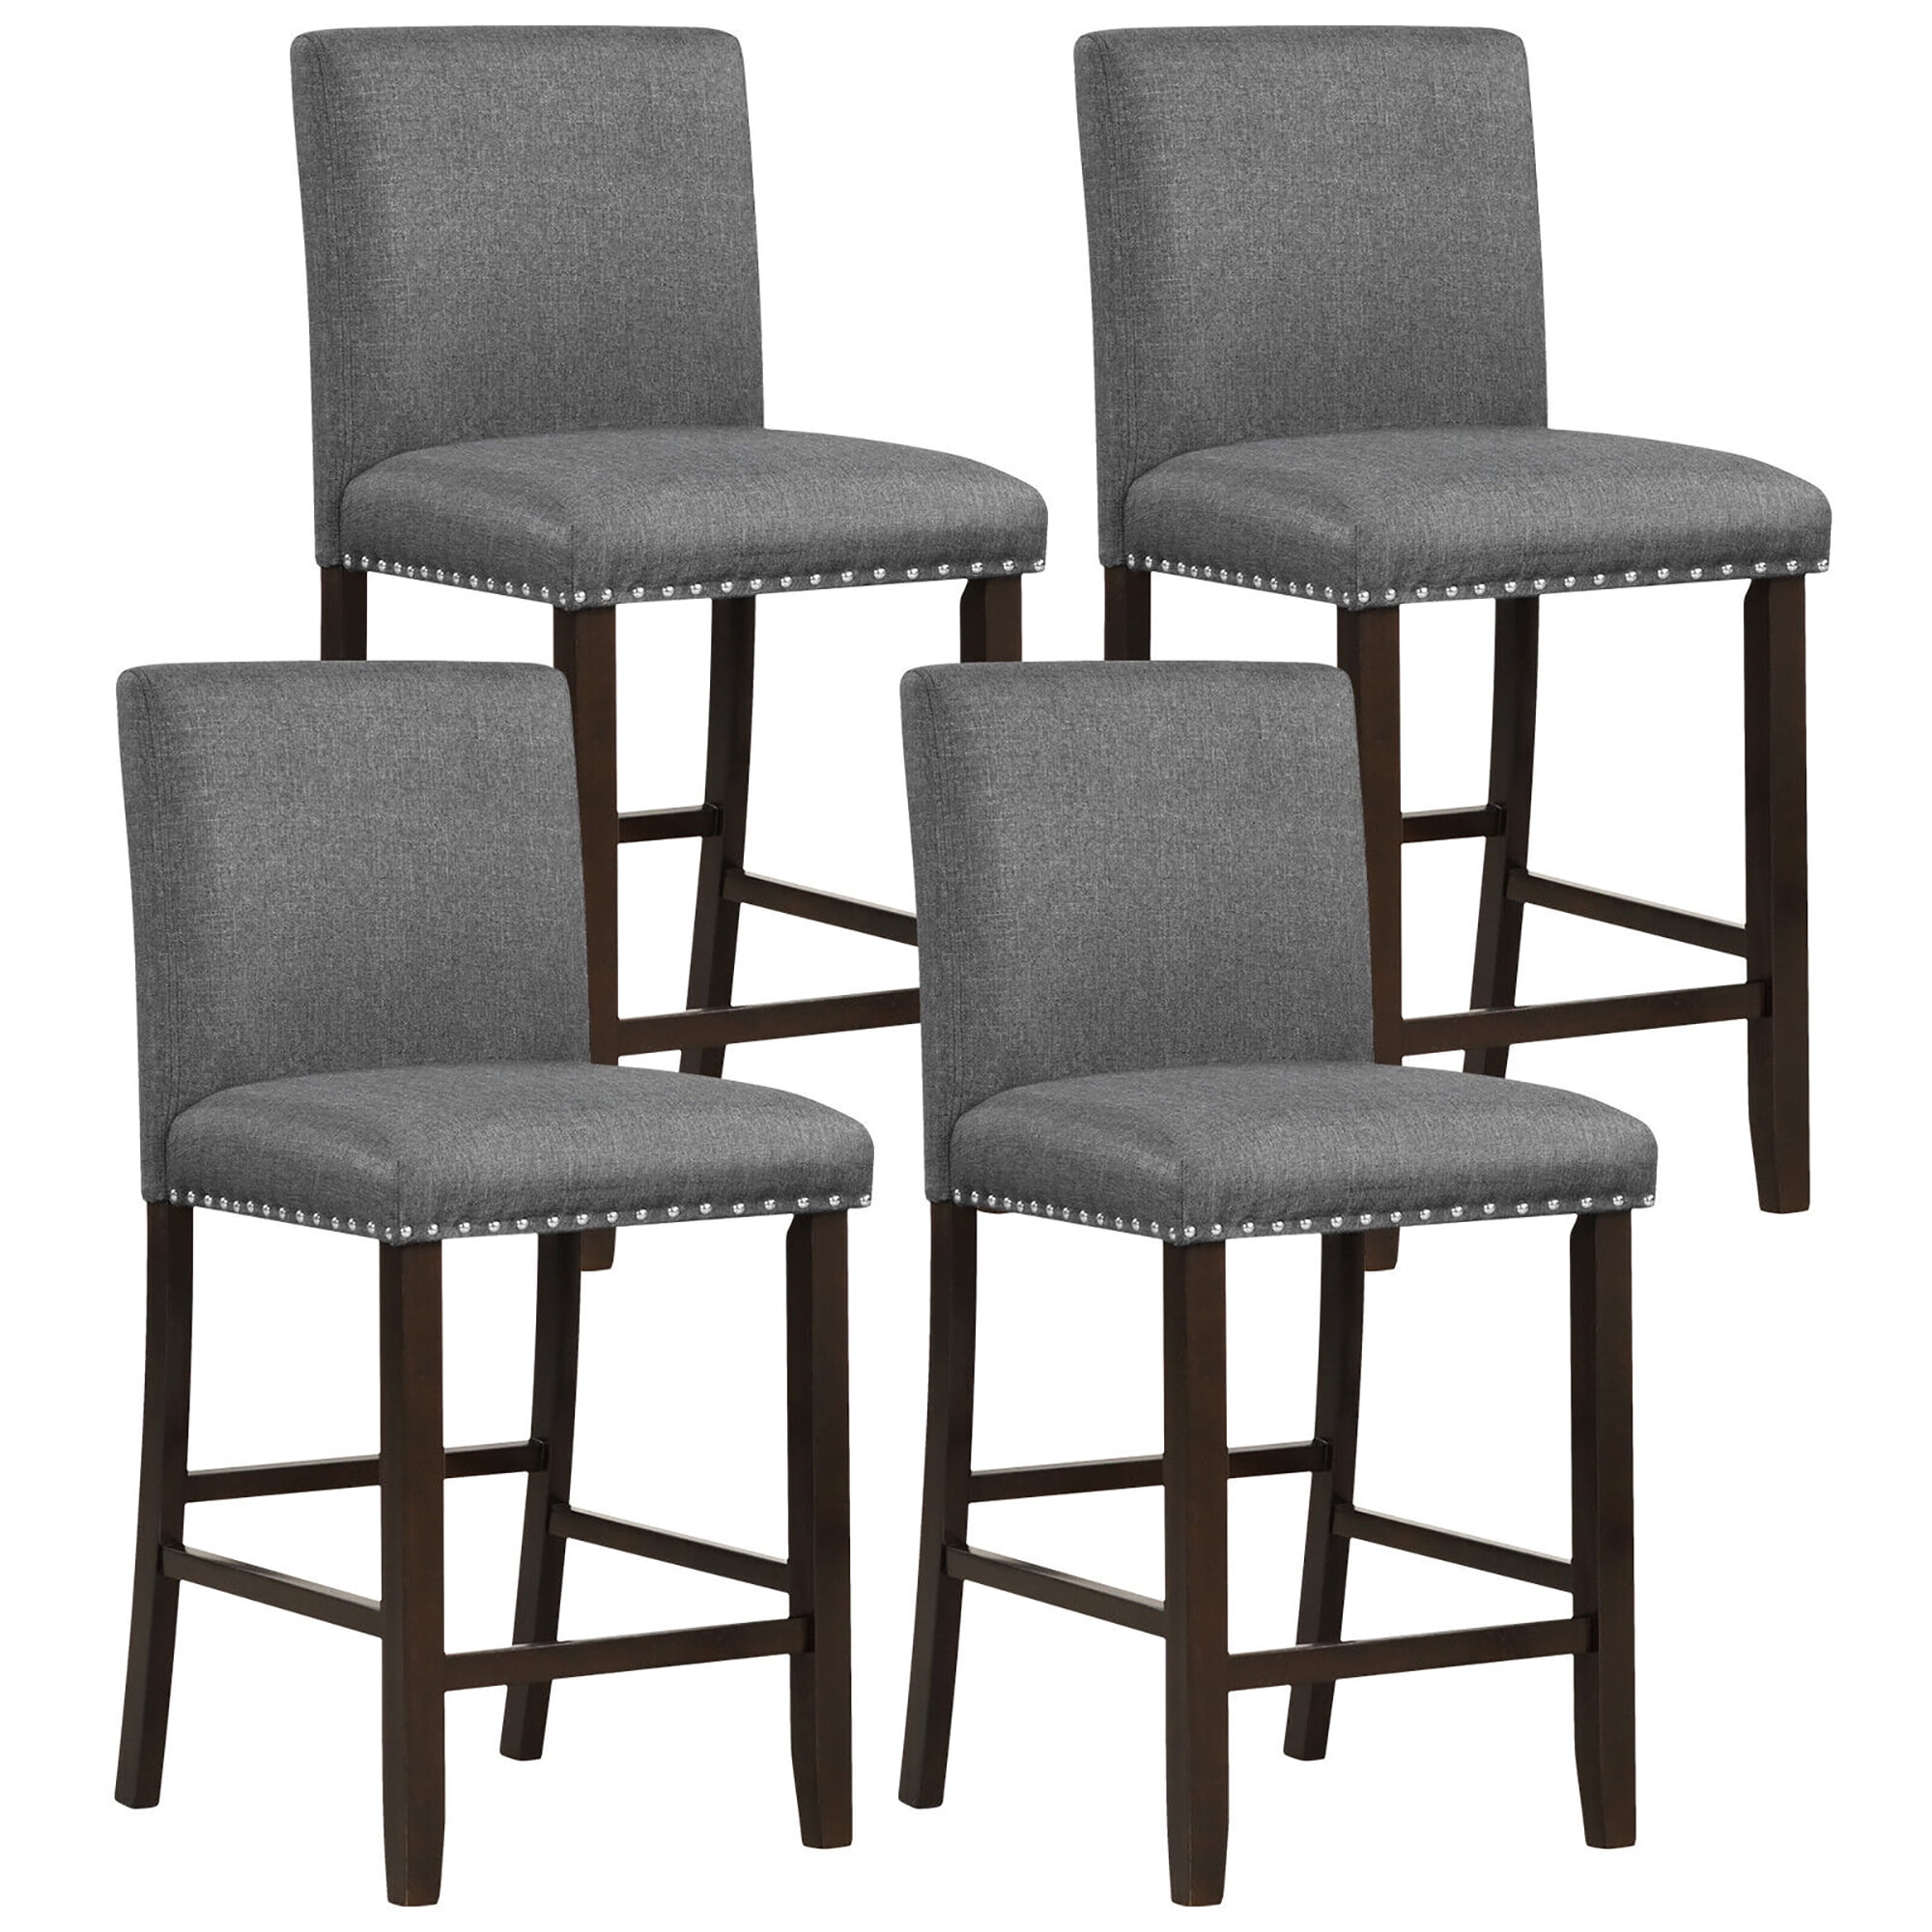 Gymax Set of 4 Bar Stools Linen Fabric Counter Height Chairs for ...